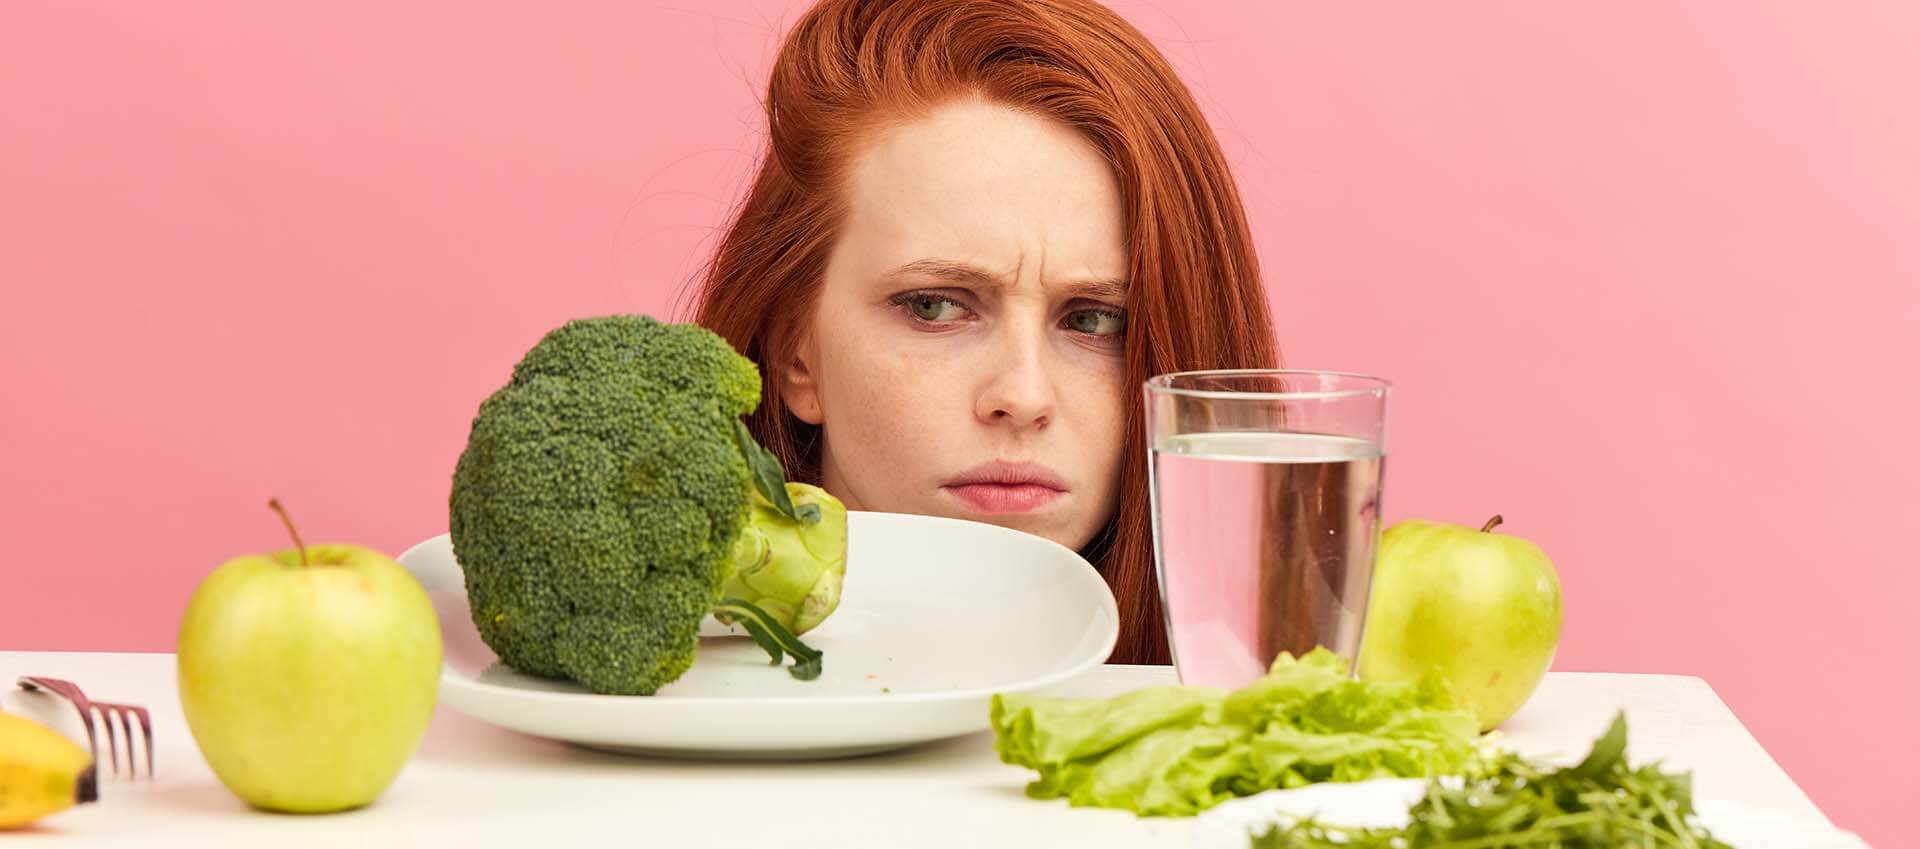 Woman peering suspicously at plate of broccoli. Dealing with an eating disorder sucks! Get help from a skilled eating disorder therapist who gets it. Begin eating disorder treatment in Florida today!